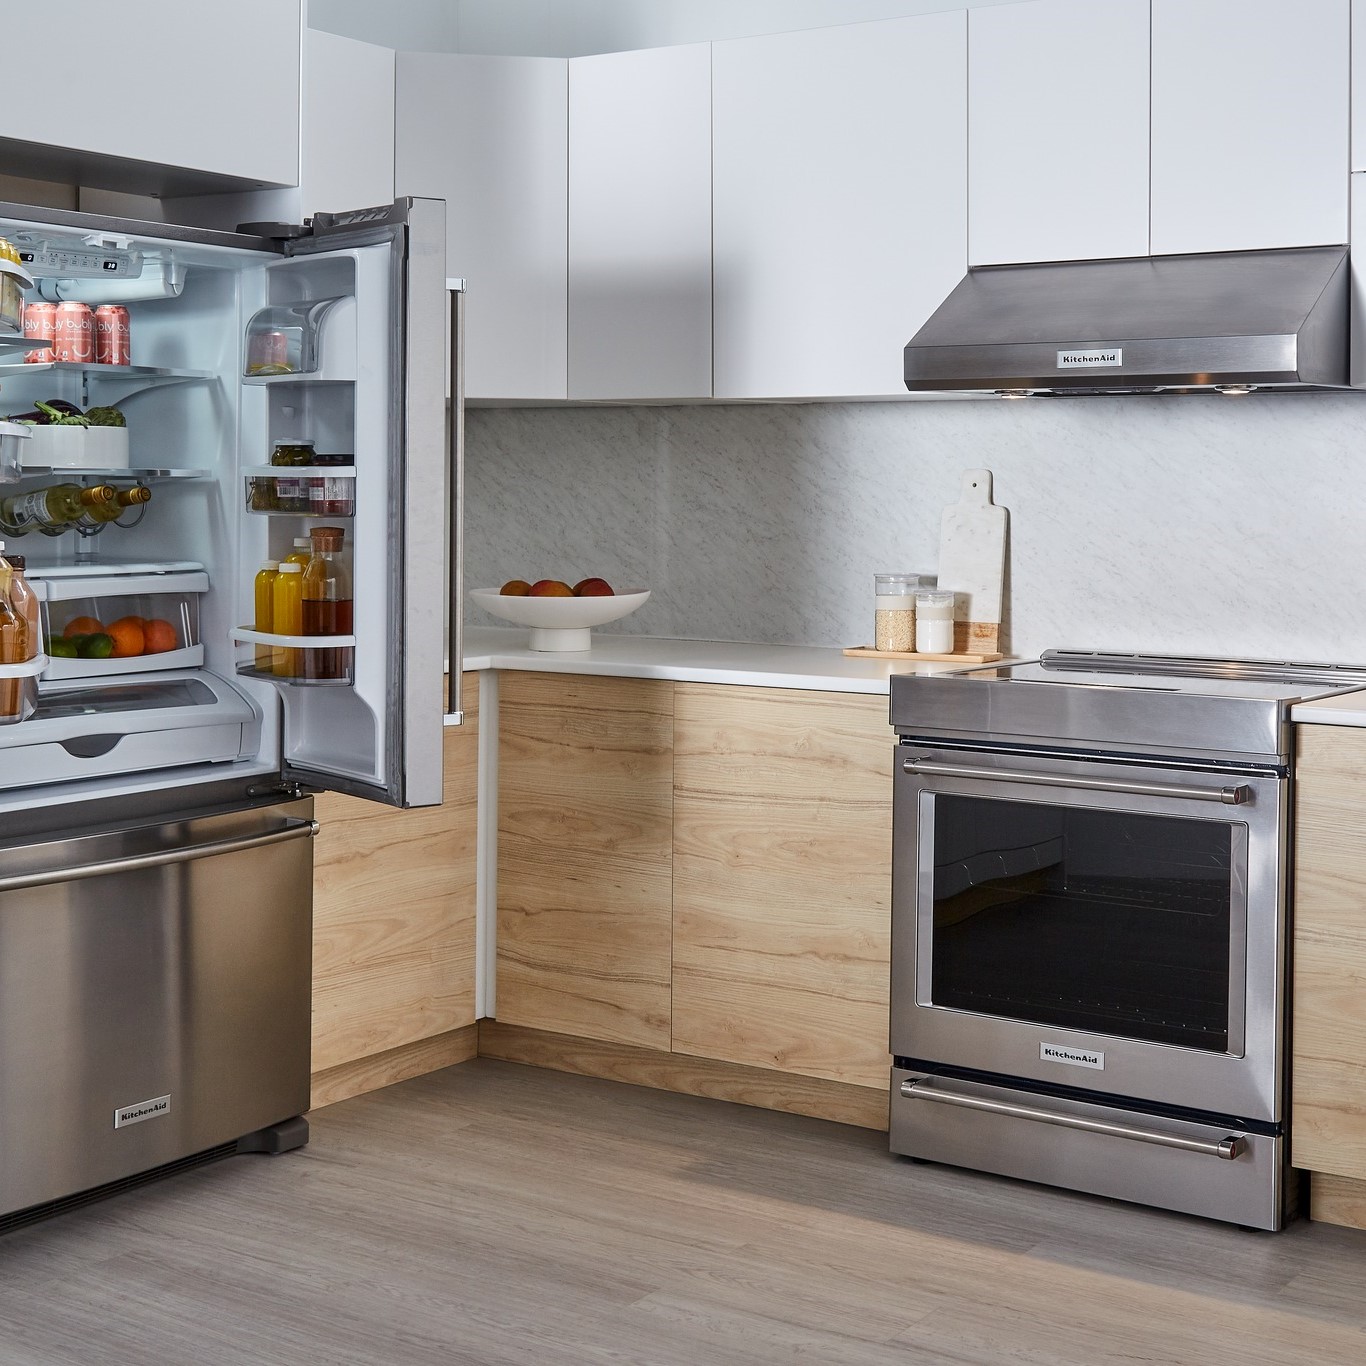 Albert Lee Appliance Review - Must Read This Before Buying